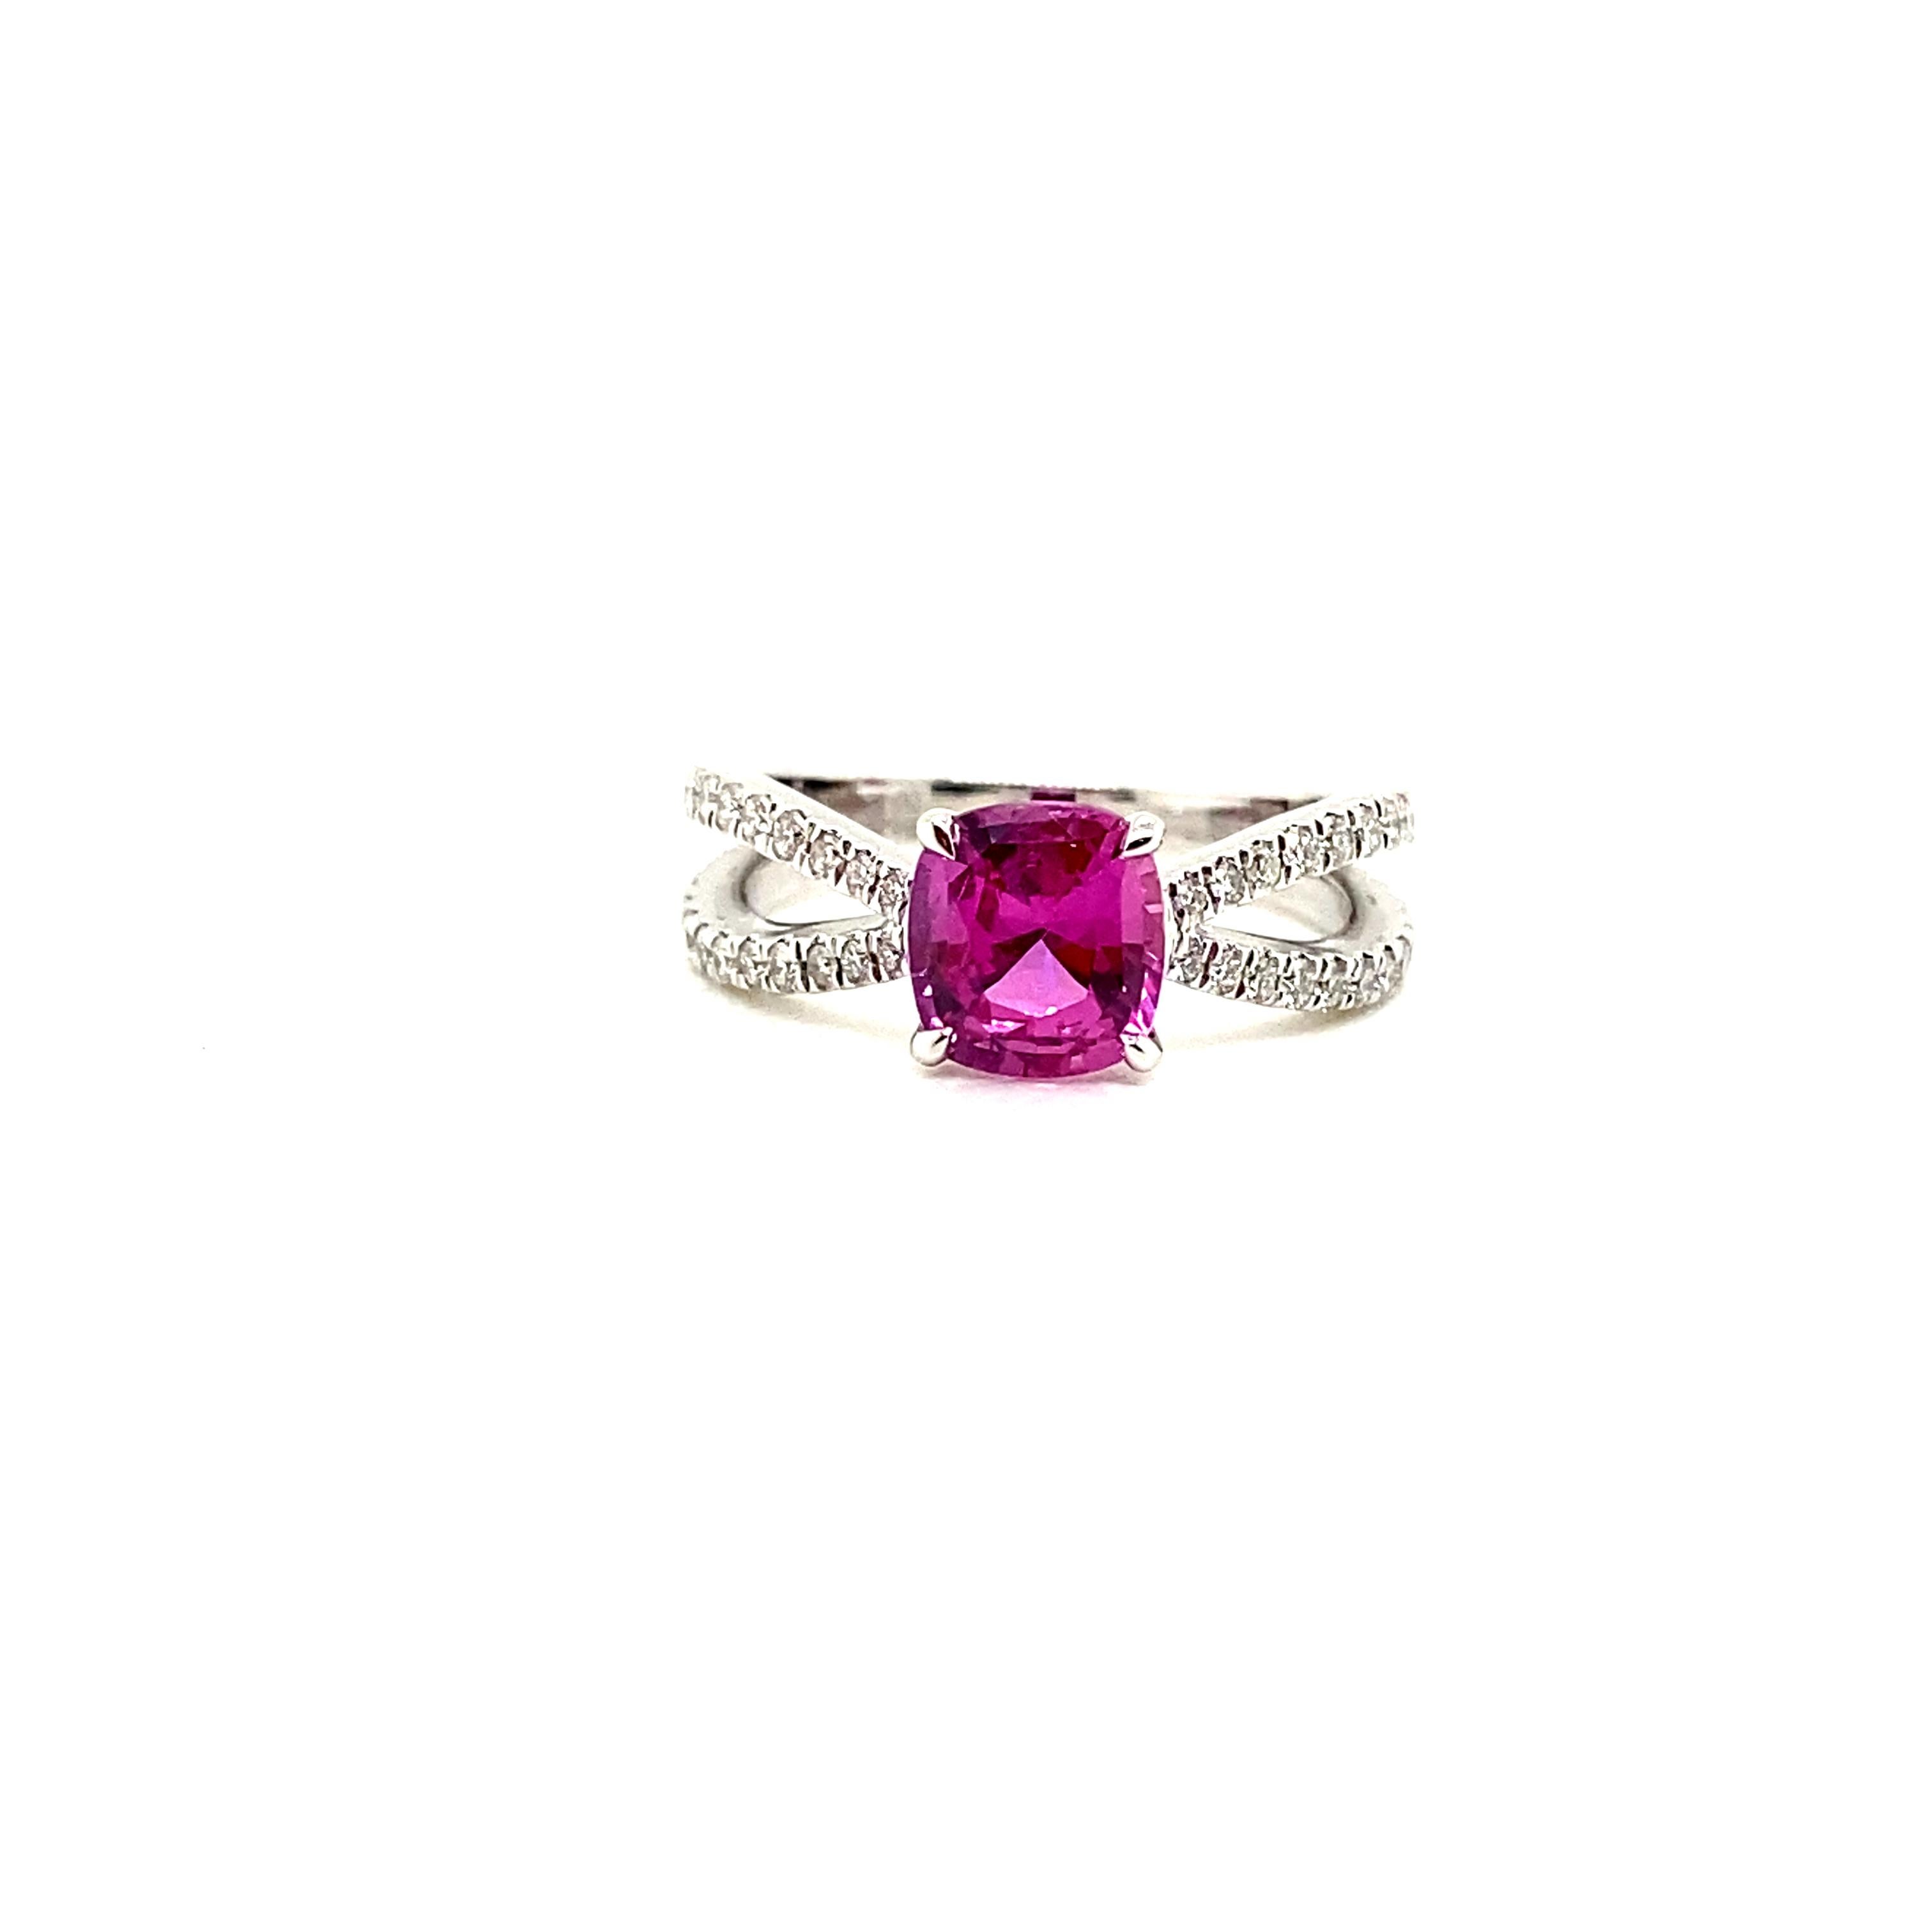 1.85 Carat GRS Certified Ceylon Vivid Pink Sapphire and Diamond Engagement Ring:

A gorgeous ring, it features a GRS certified cushion-cut vivid pink sapphire weighing weighing 1.85 carat, with white round brilliant-cut diamonds embellished on the